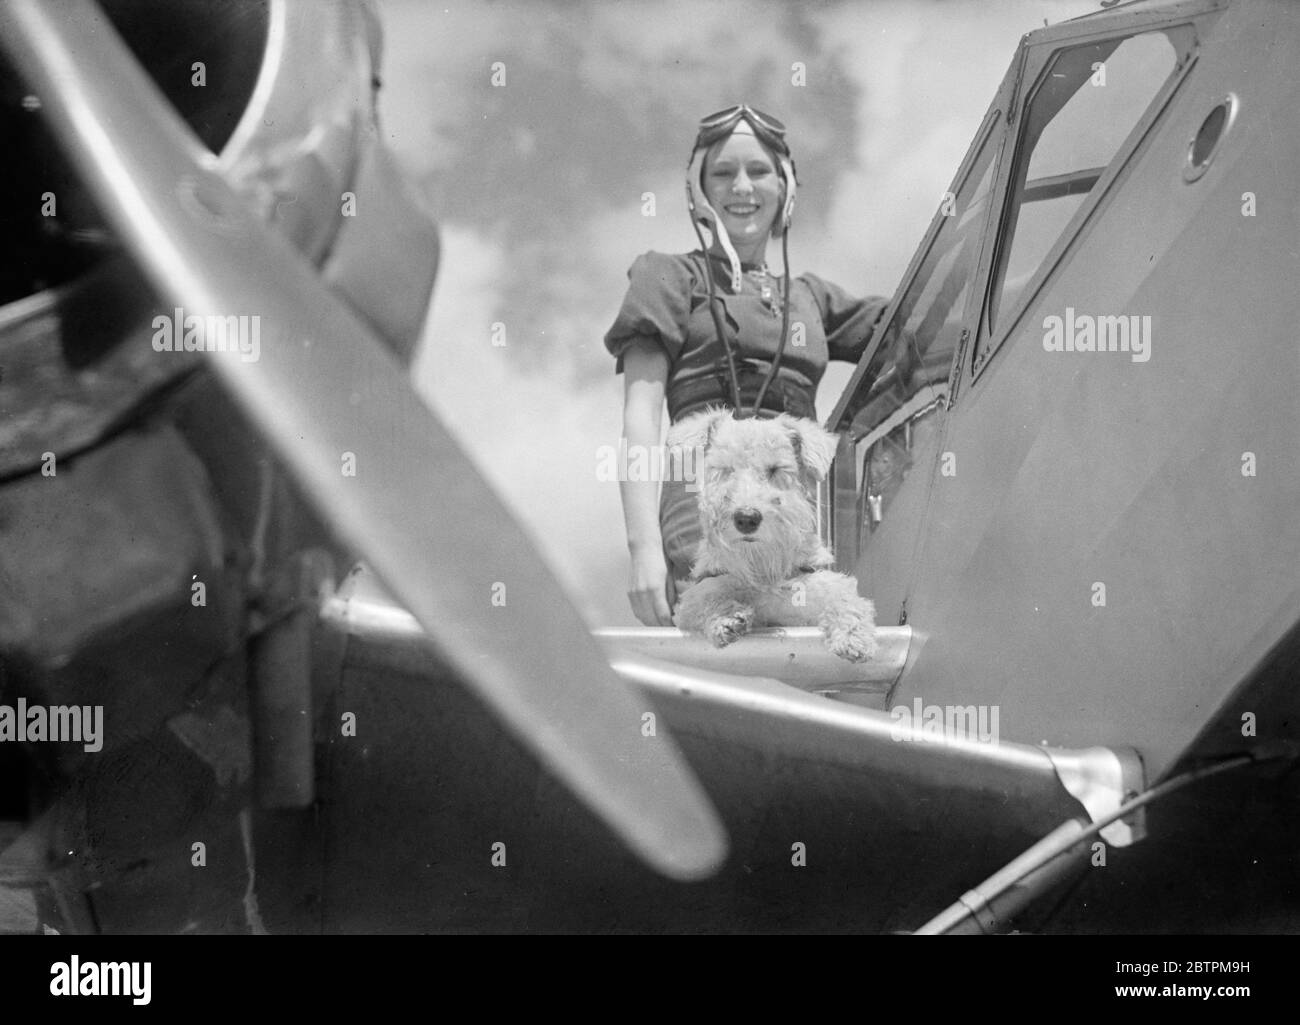 Air minded . Mrs Stace , charming air woman and director of aviation firm about to take her pet dog on a flight . Stock Photo